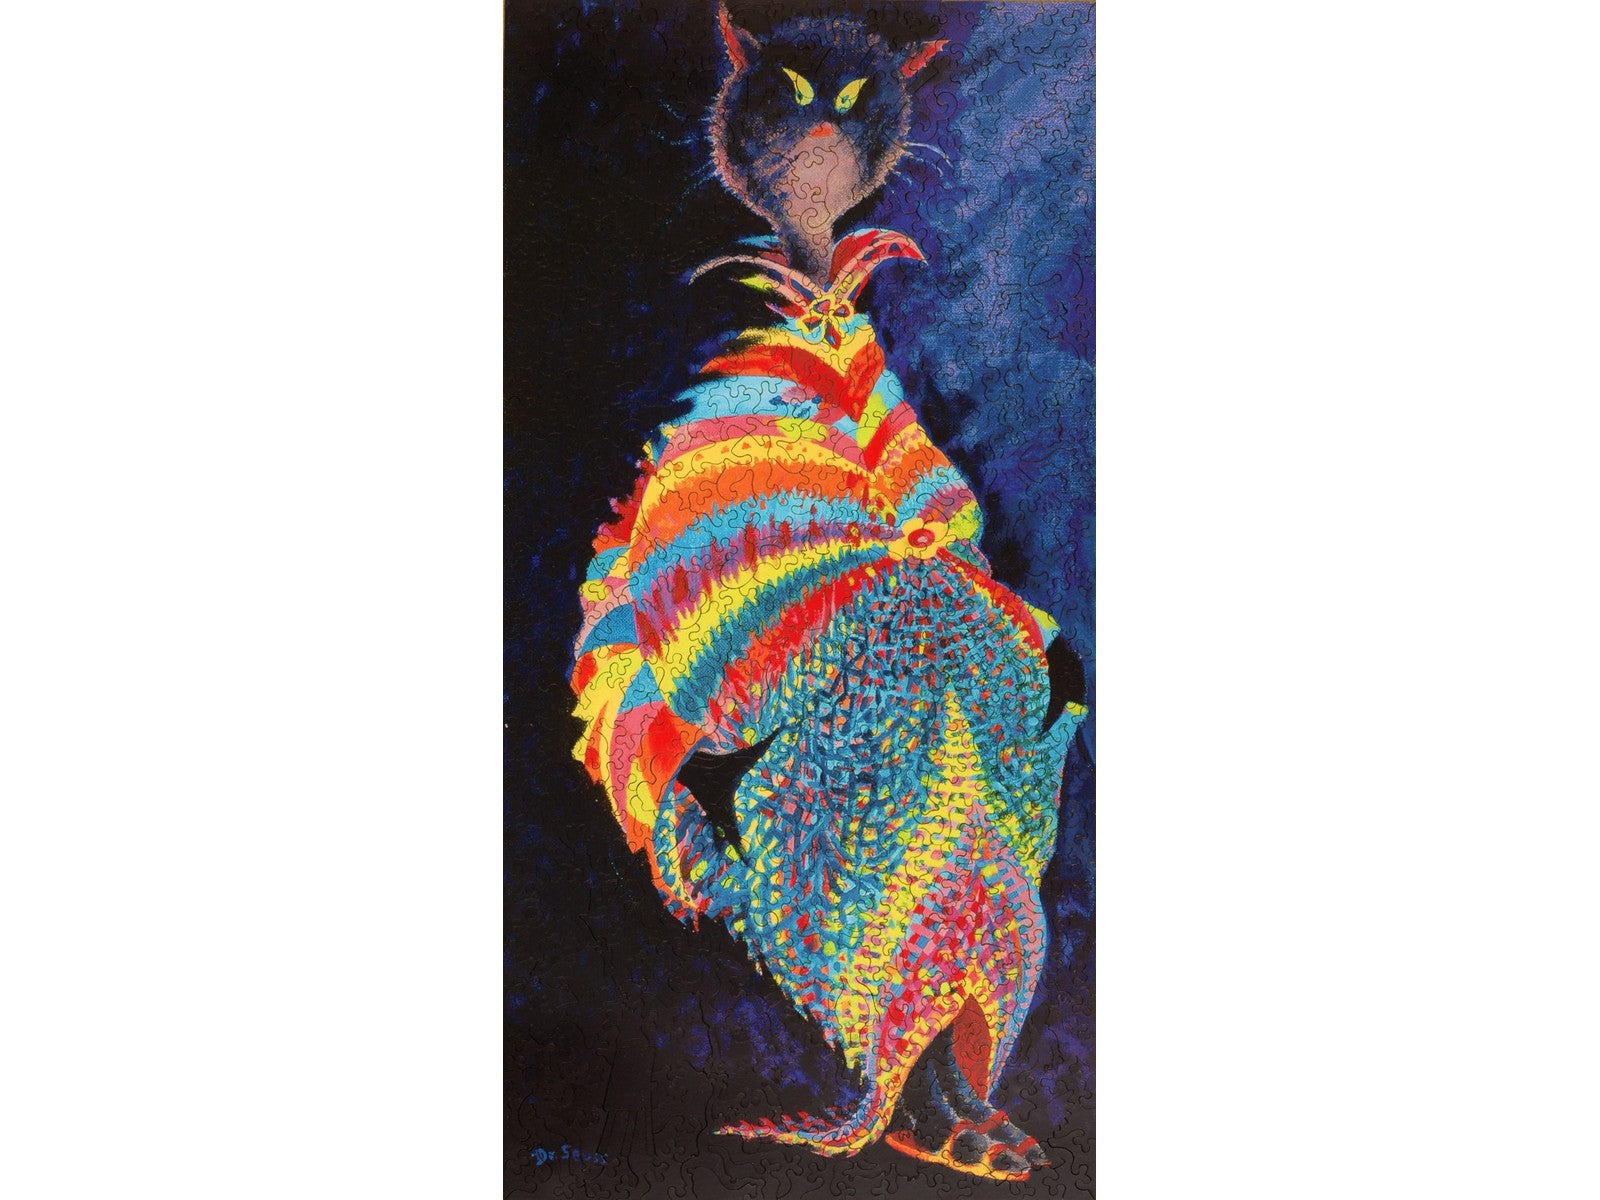 The front of the puzzle, Joseph Katz and His Coat of Many Colors, showing a cat wearing a colorful coat and sandals.